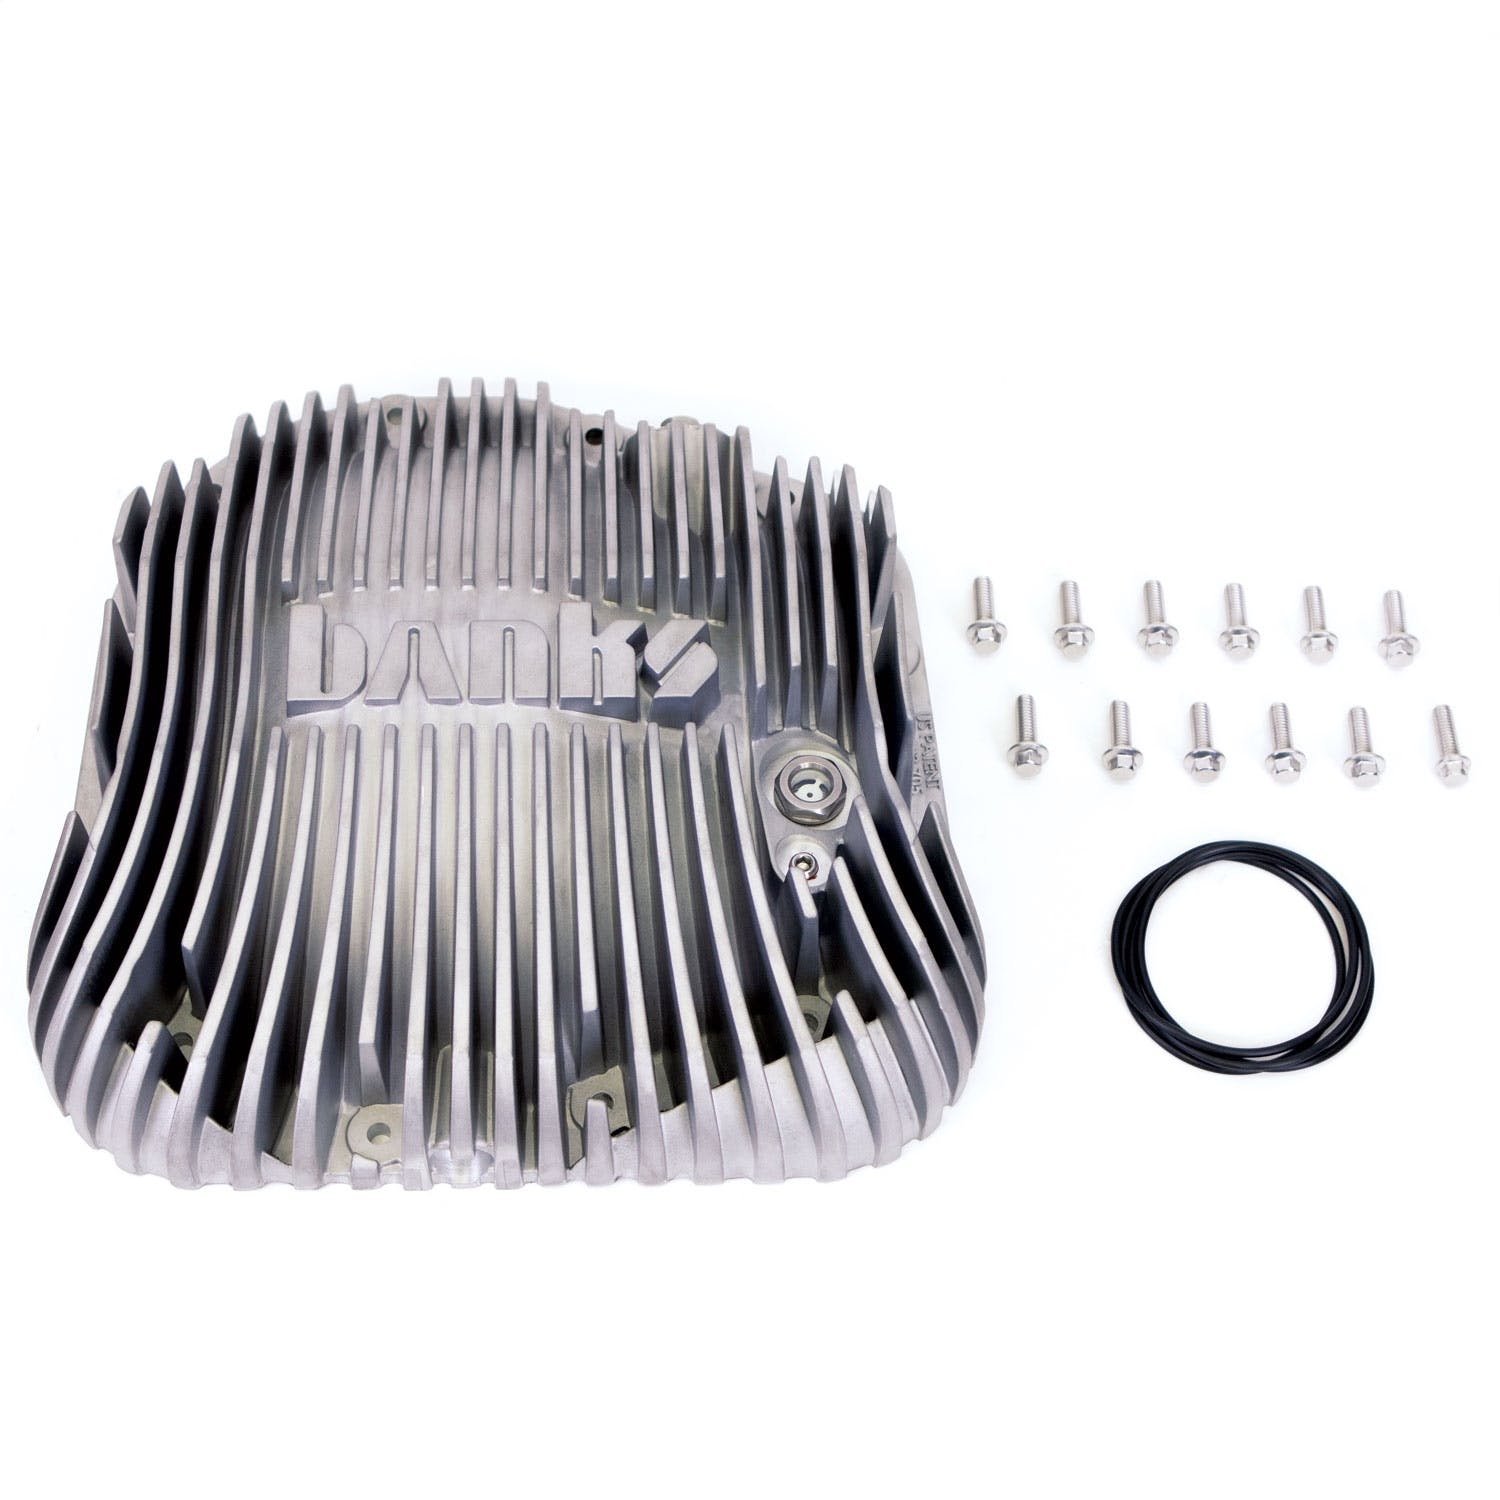 Banks Power 19262 Ram-Air® Differential Cover Kit